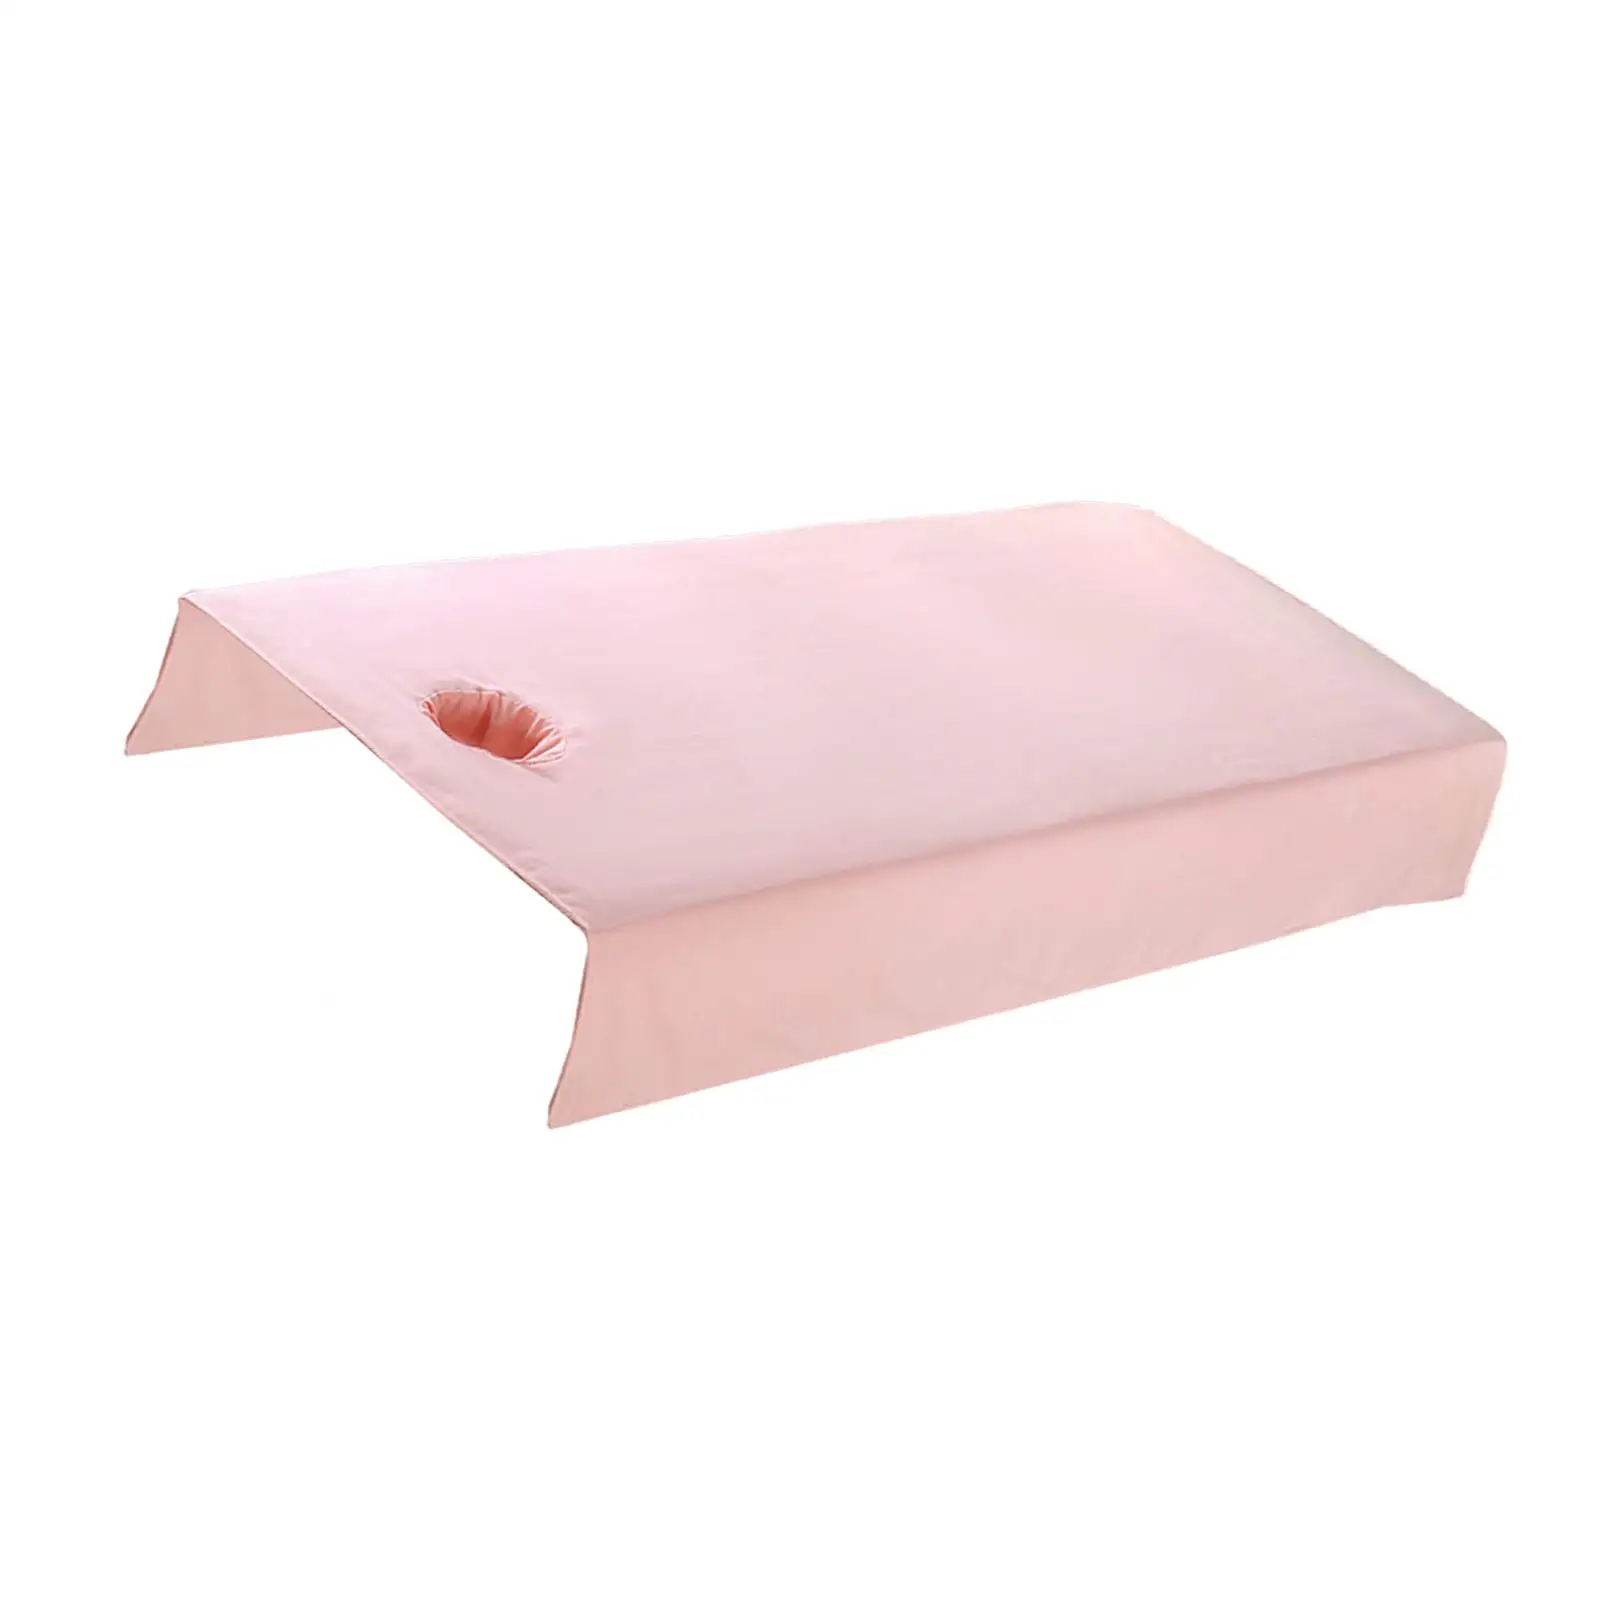 SPA Massage Bed Cover Sheet Protector with Face Hole 80x200cm Accessories